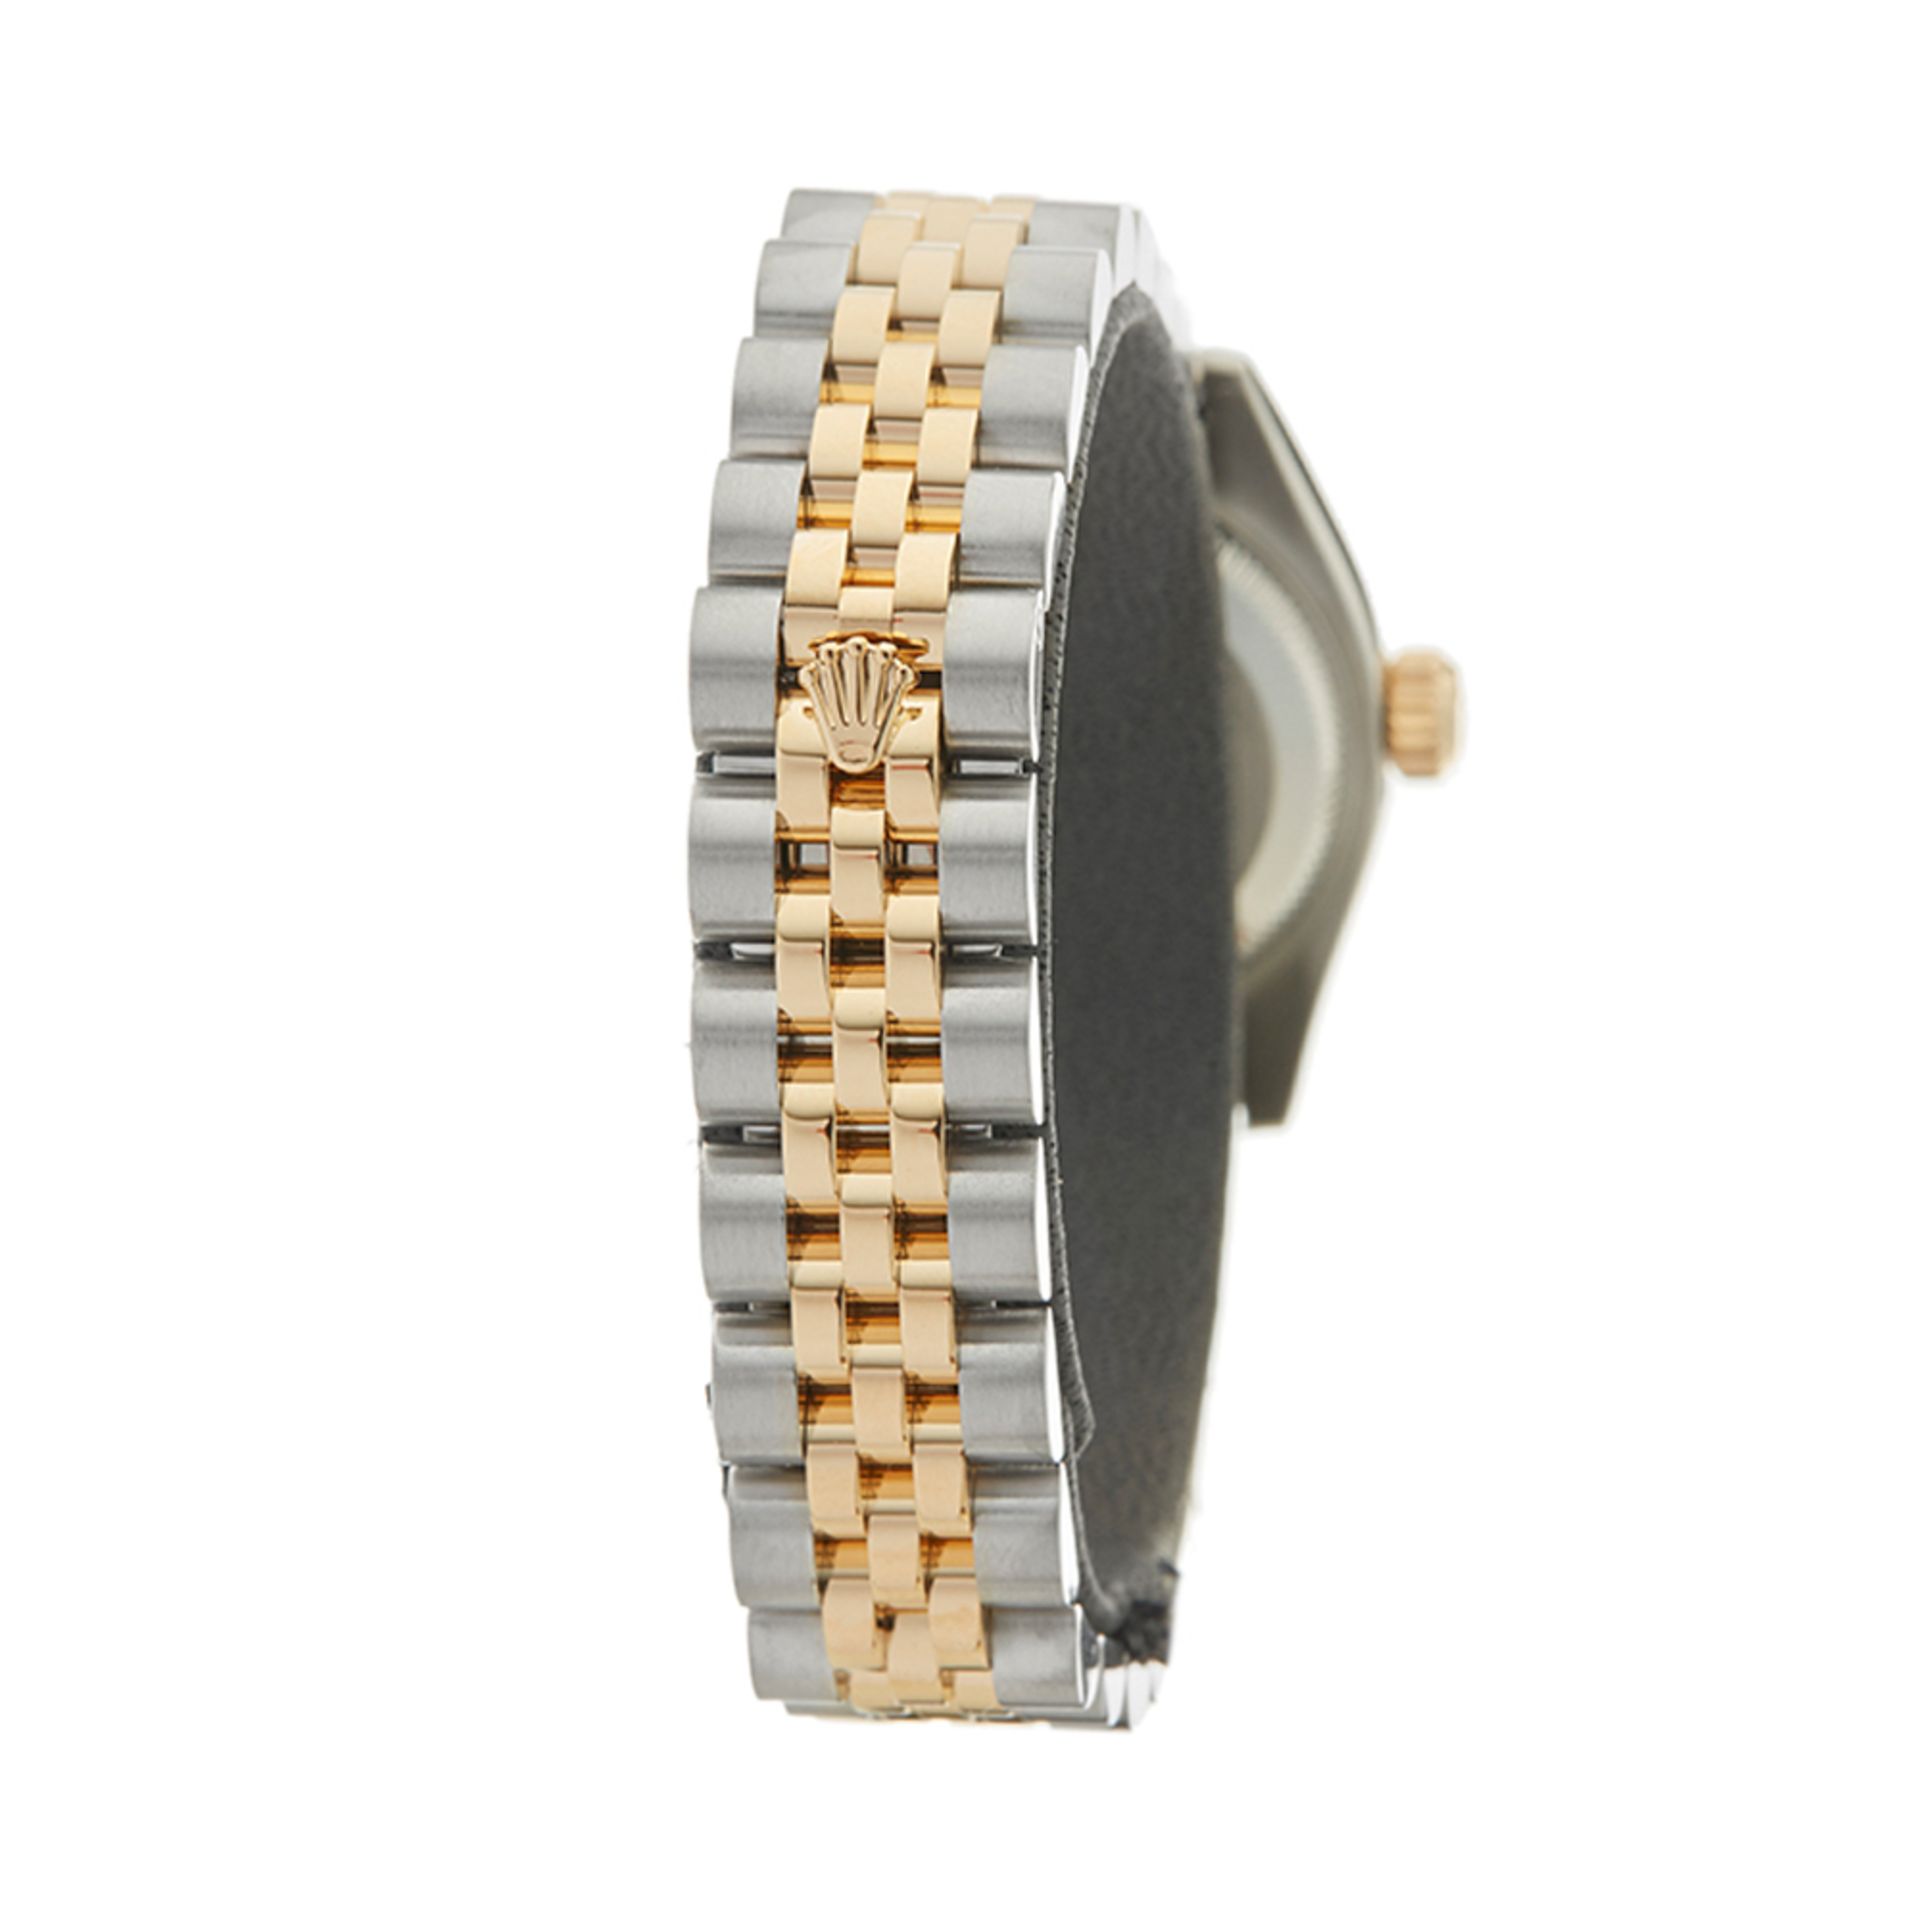 Datejust 26mm Stainless Steel & 18K Yellow Gold - 179173 - Image 6 of 8